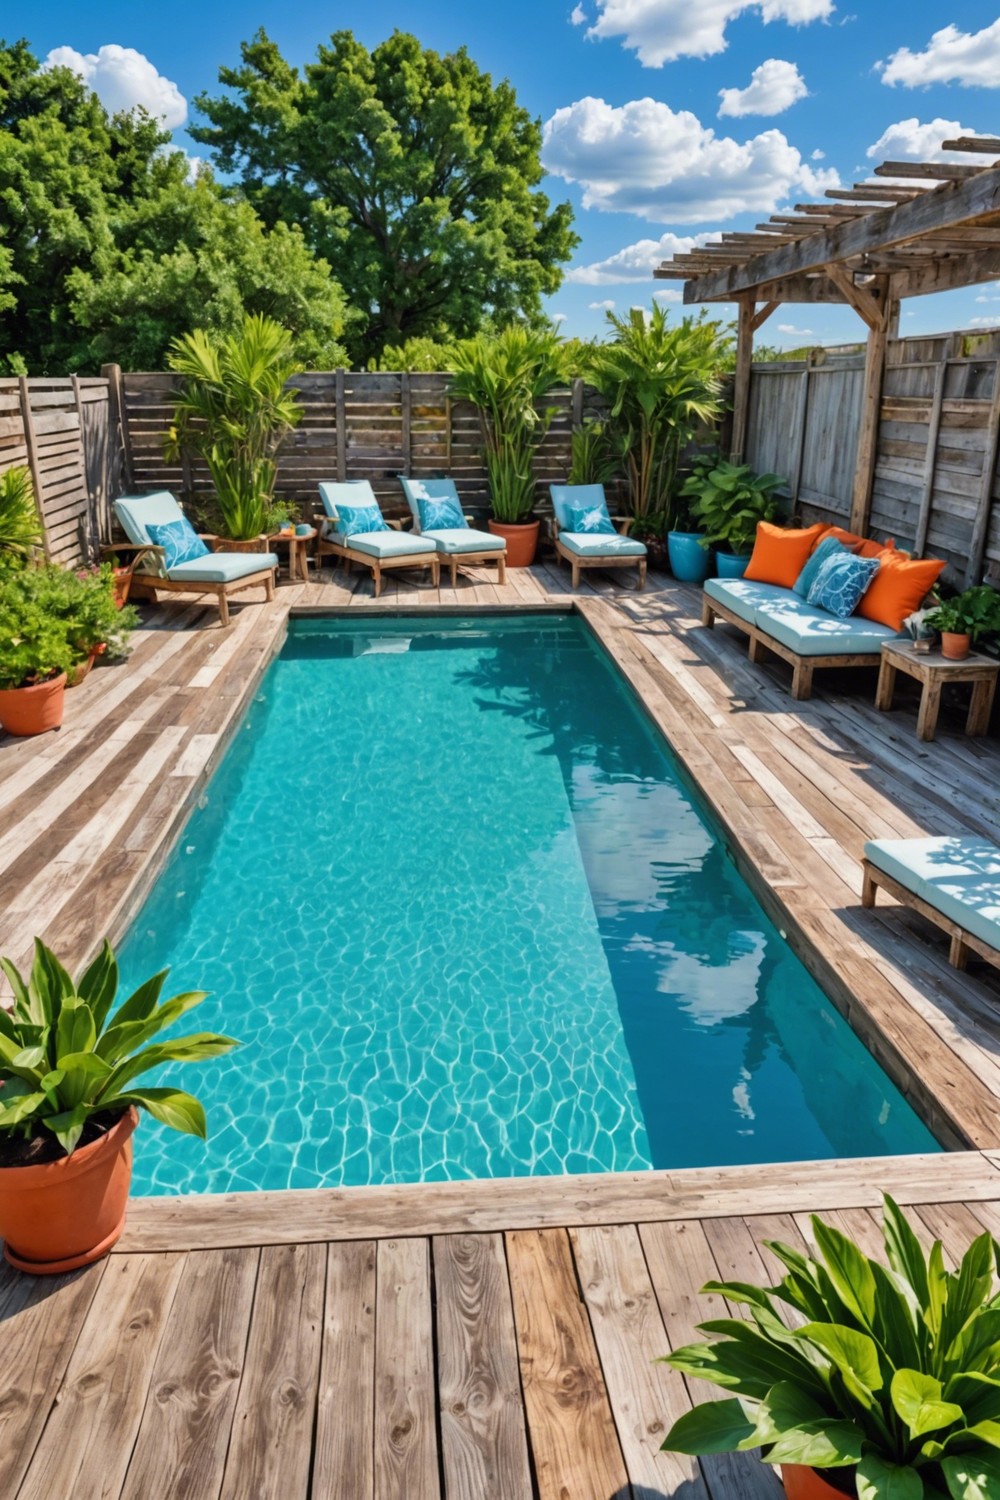 Coastal Pallet Pool Decks with Driftwood Accents